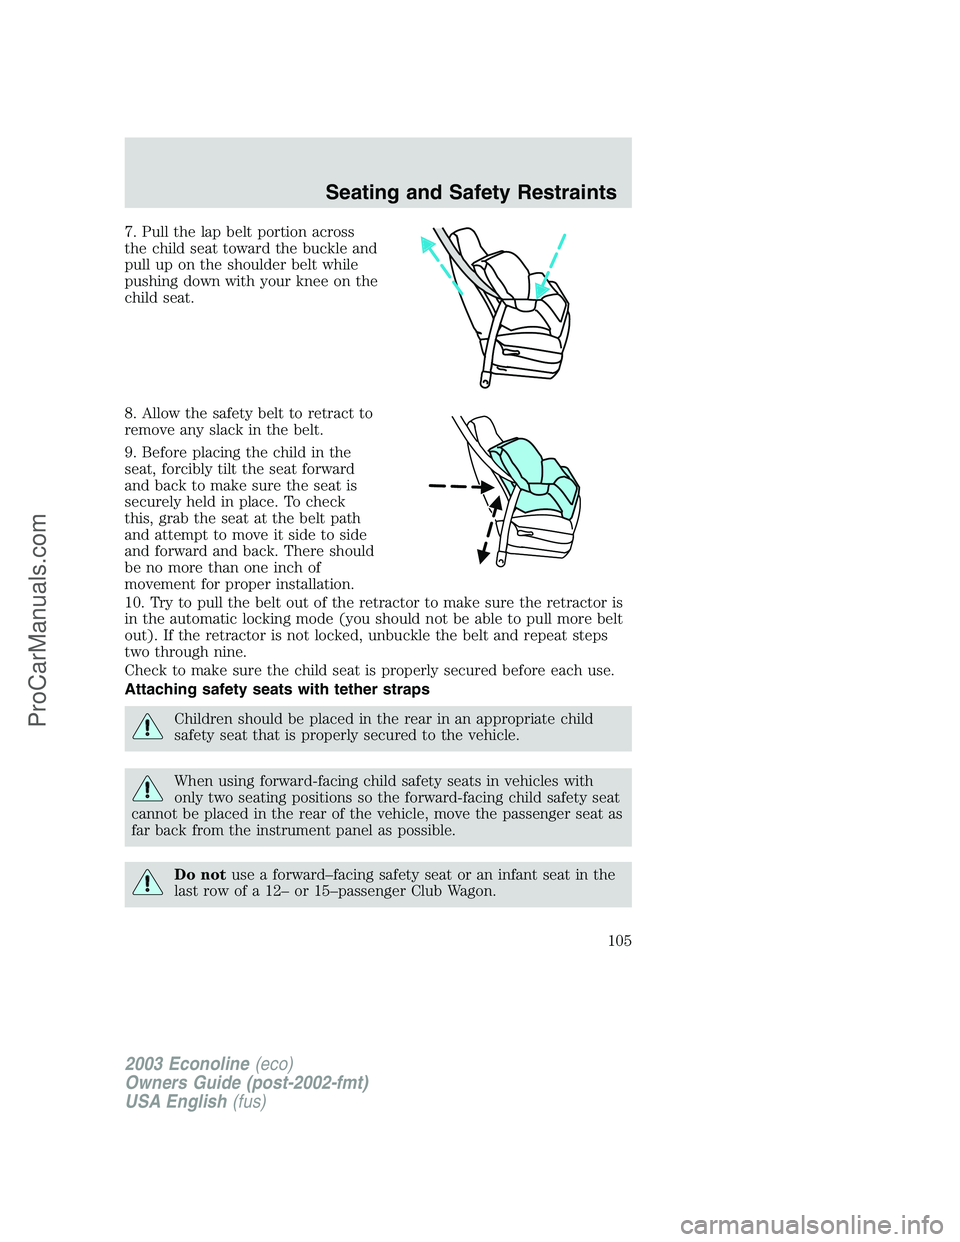 FORD E-150 2003  Owners Manual 7. Pull the lap belt portion across
the child seat toward the buckle and
pull up on the shoulder belt while
pushing down with your knee on the
child seat.
8. Allow the safety belt to retract to
remove